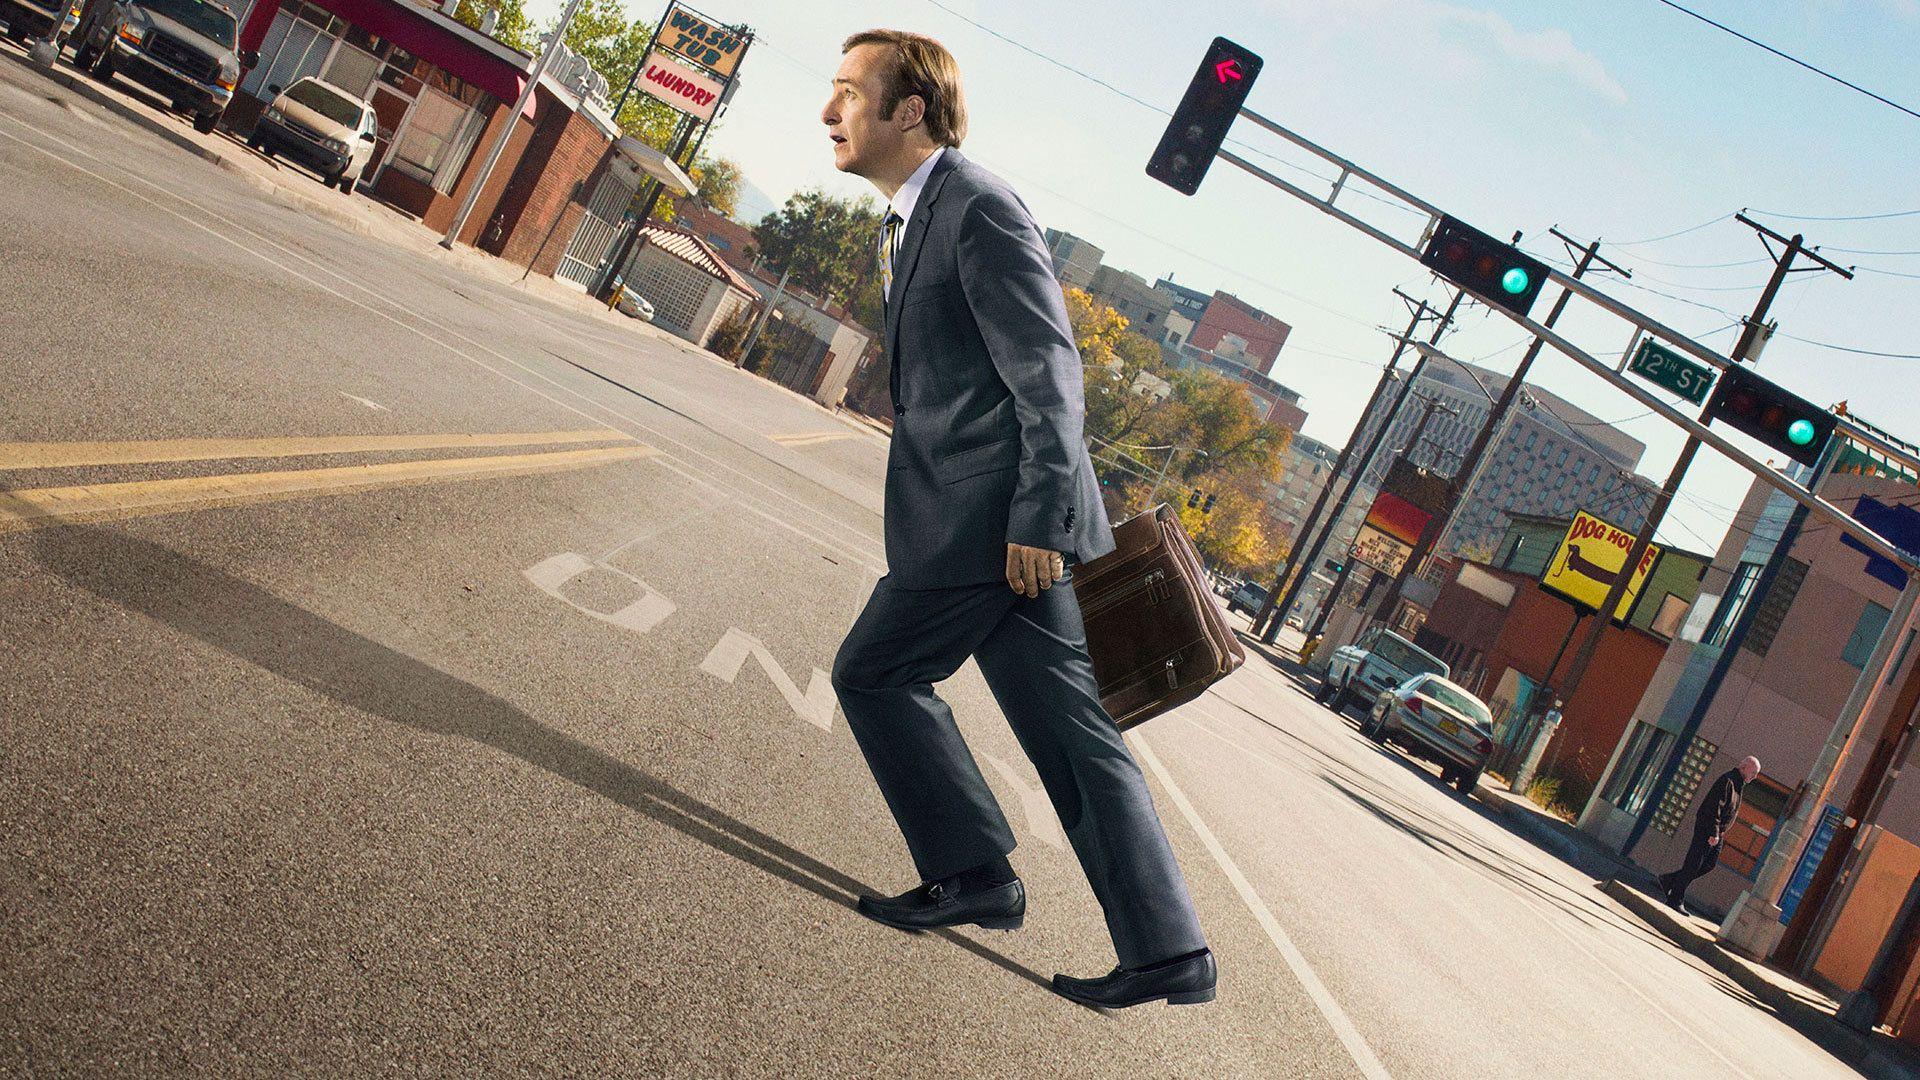 Better Call Saul Wallpaper, Picture, Image